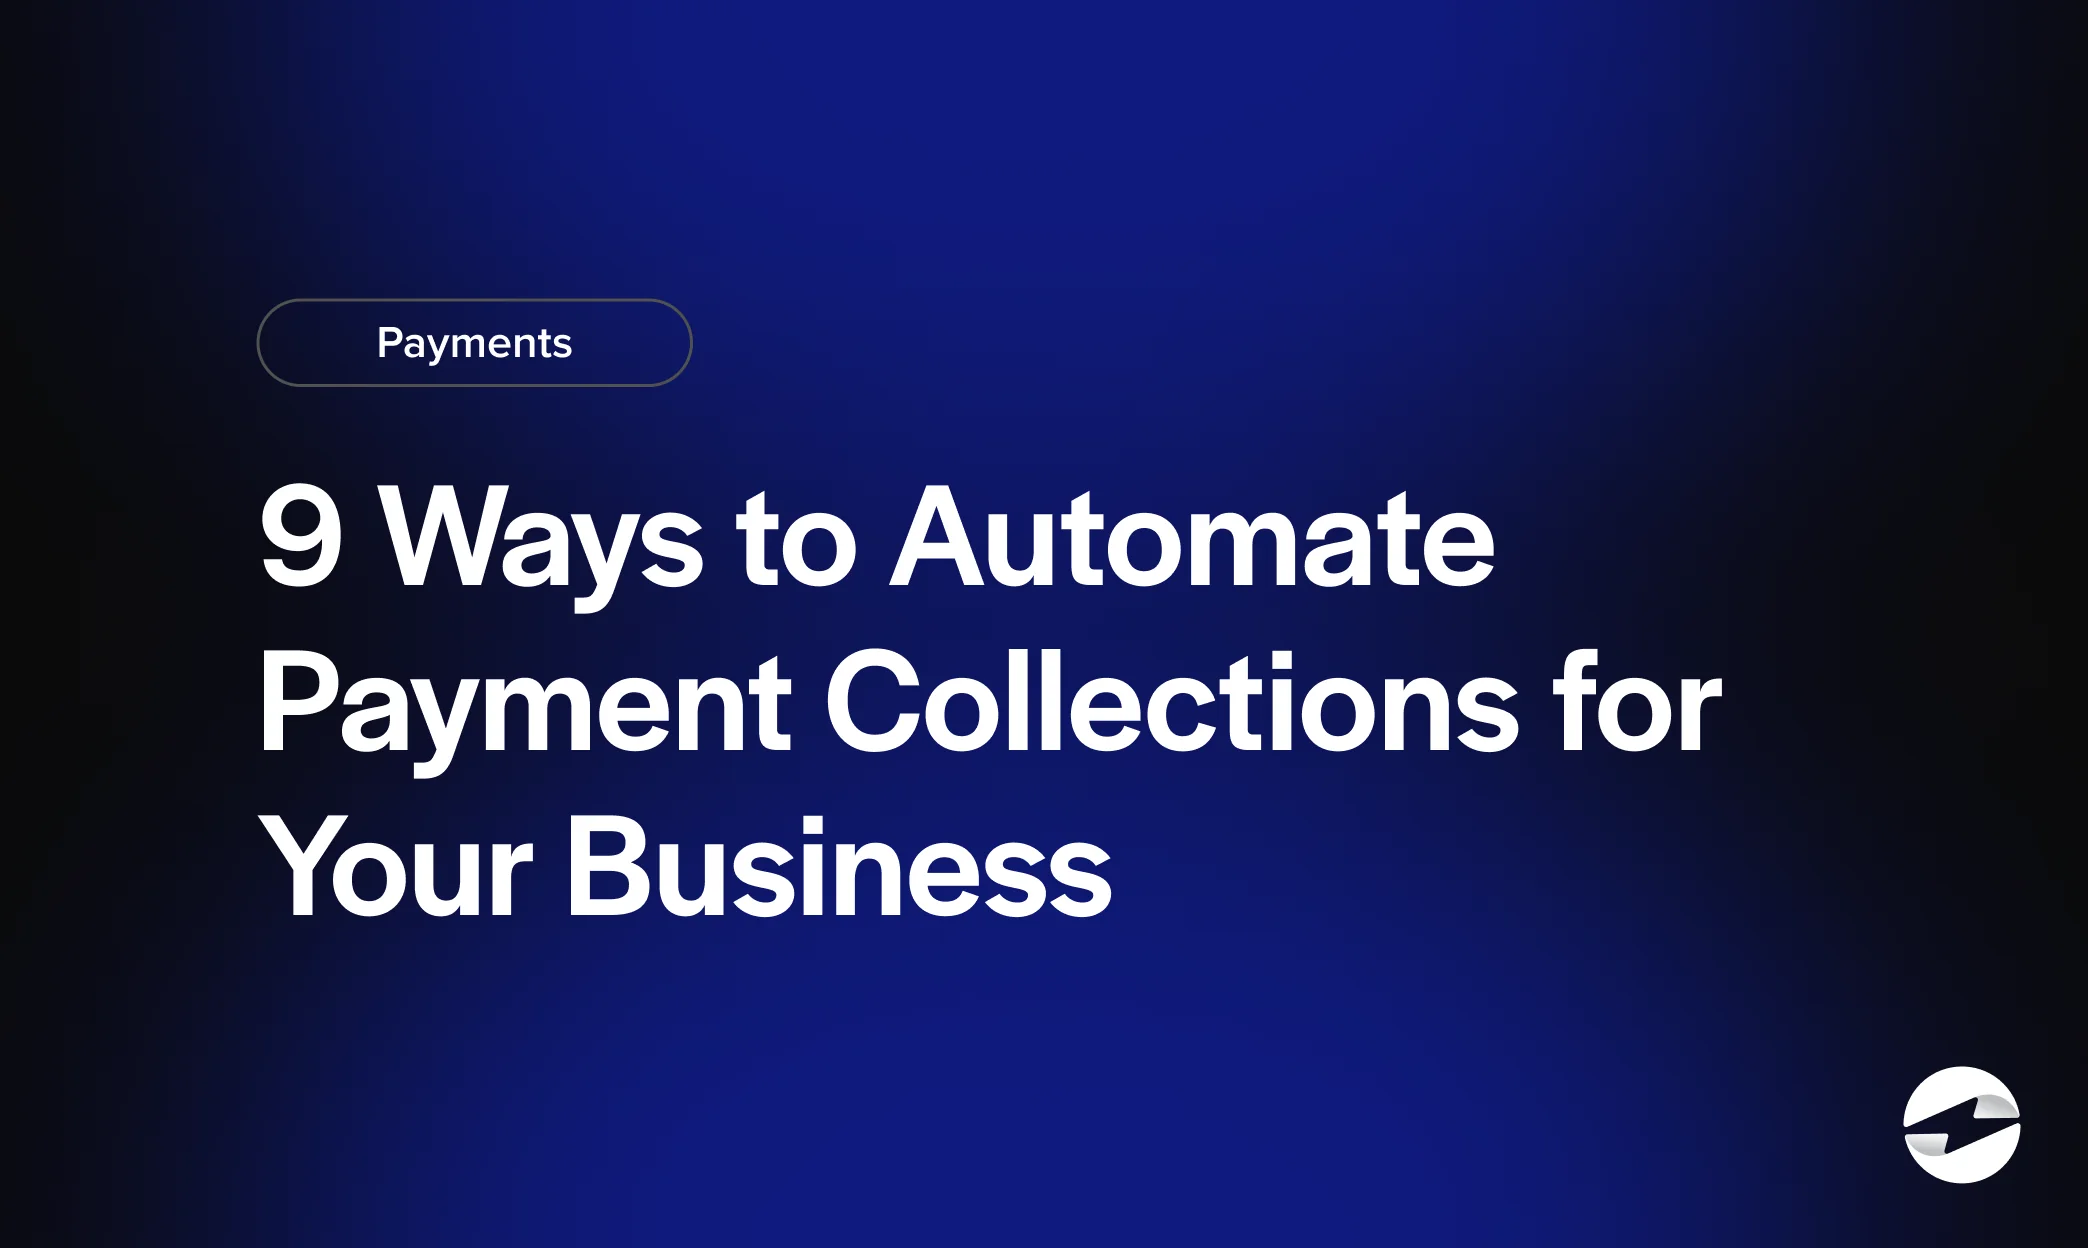 9 ways to automate payment collections for your business